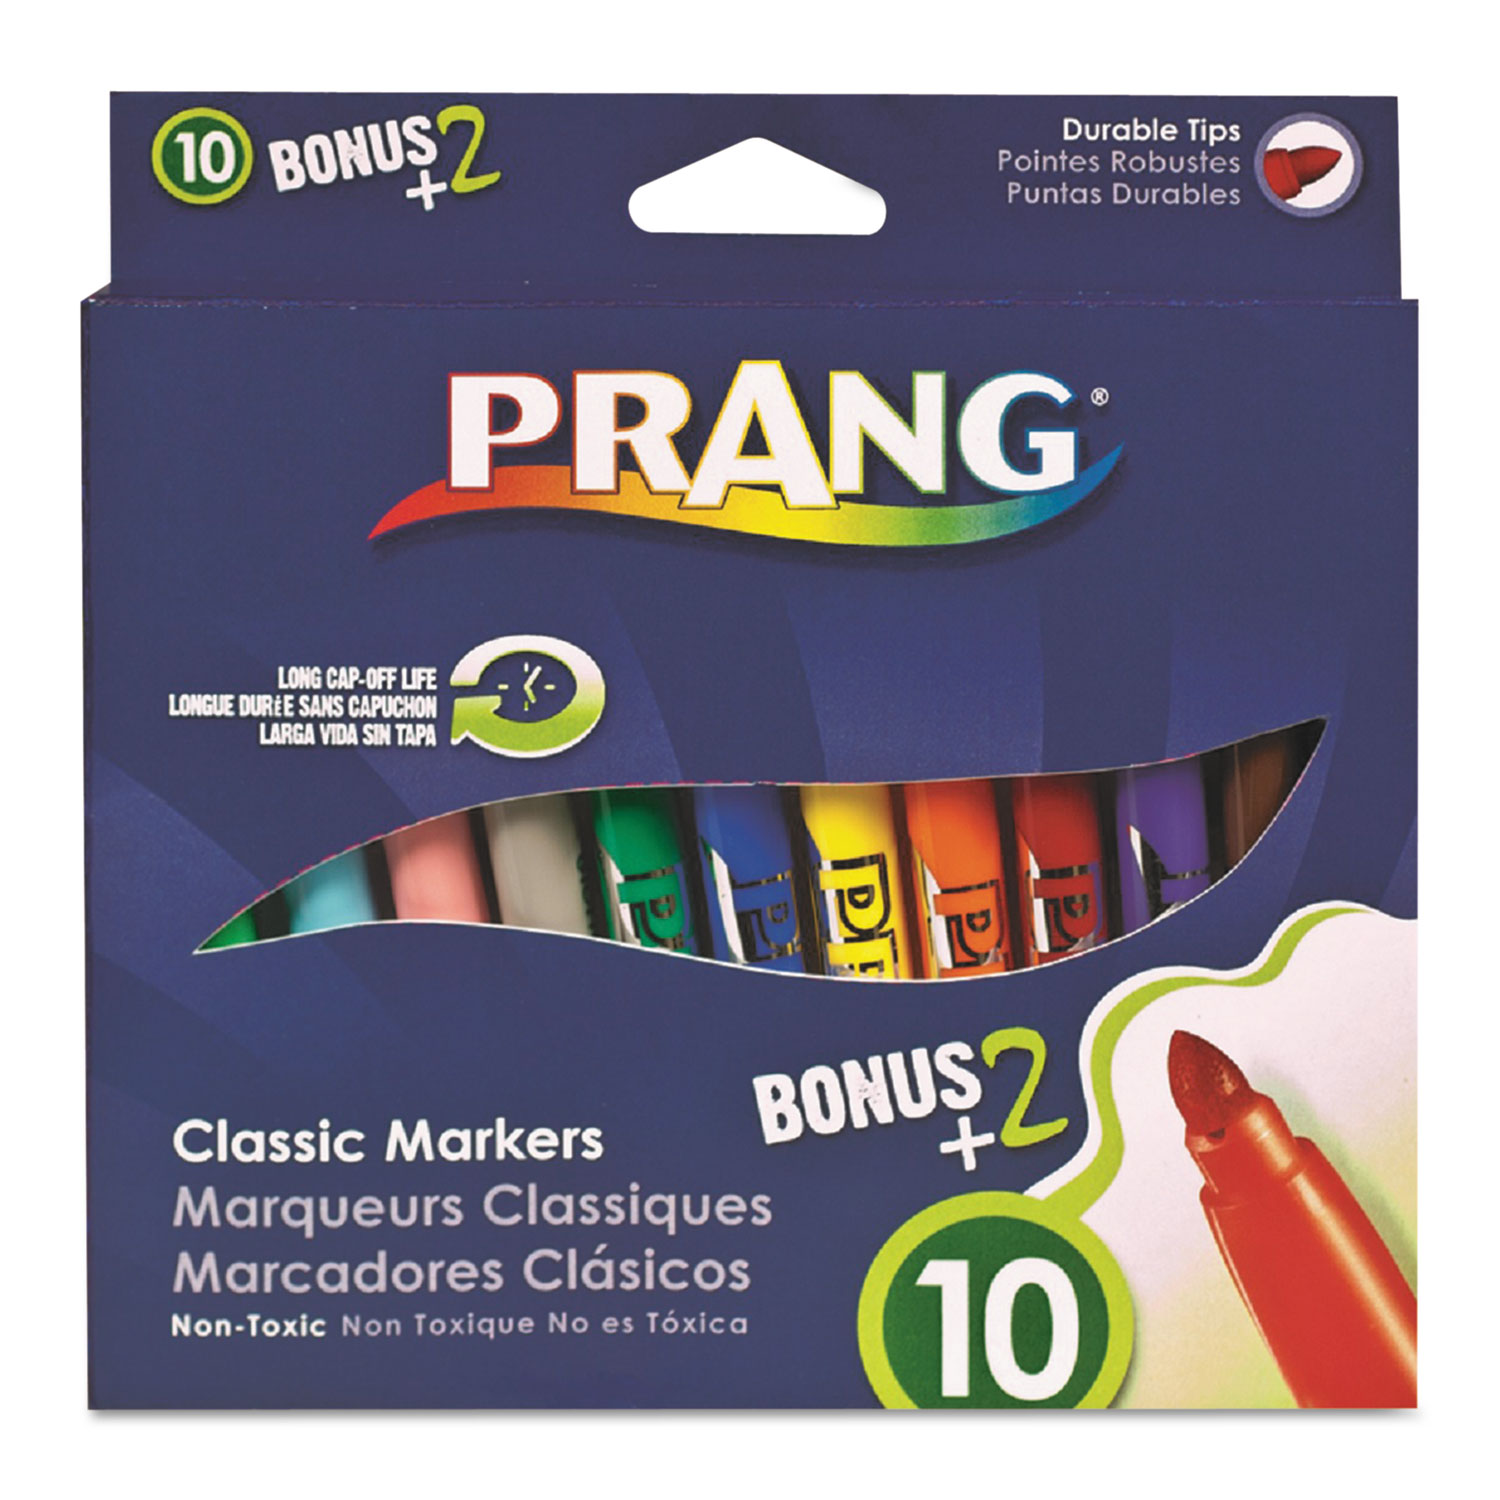 Prang Classic Art Markers, Durable Tip, 12 Assorted Colors